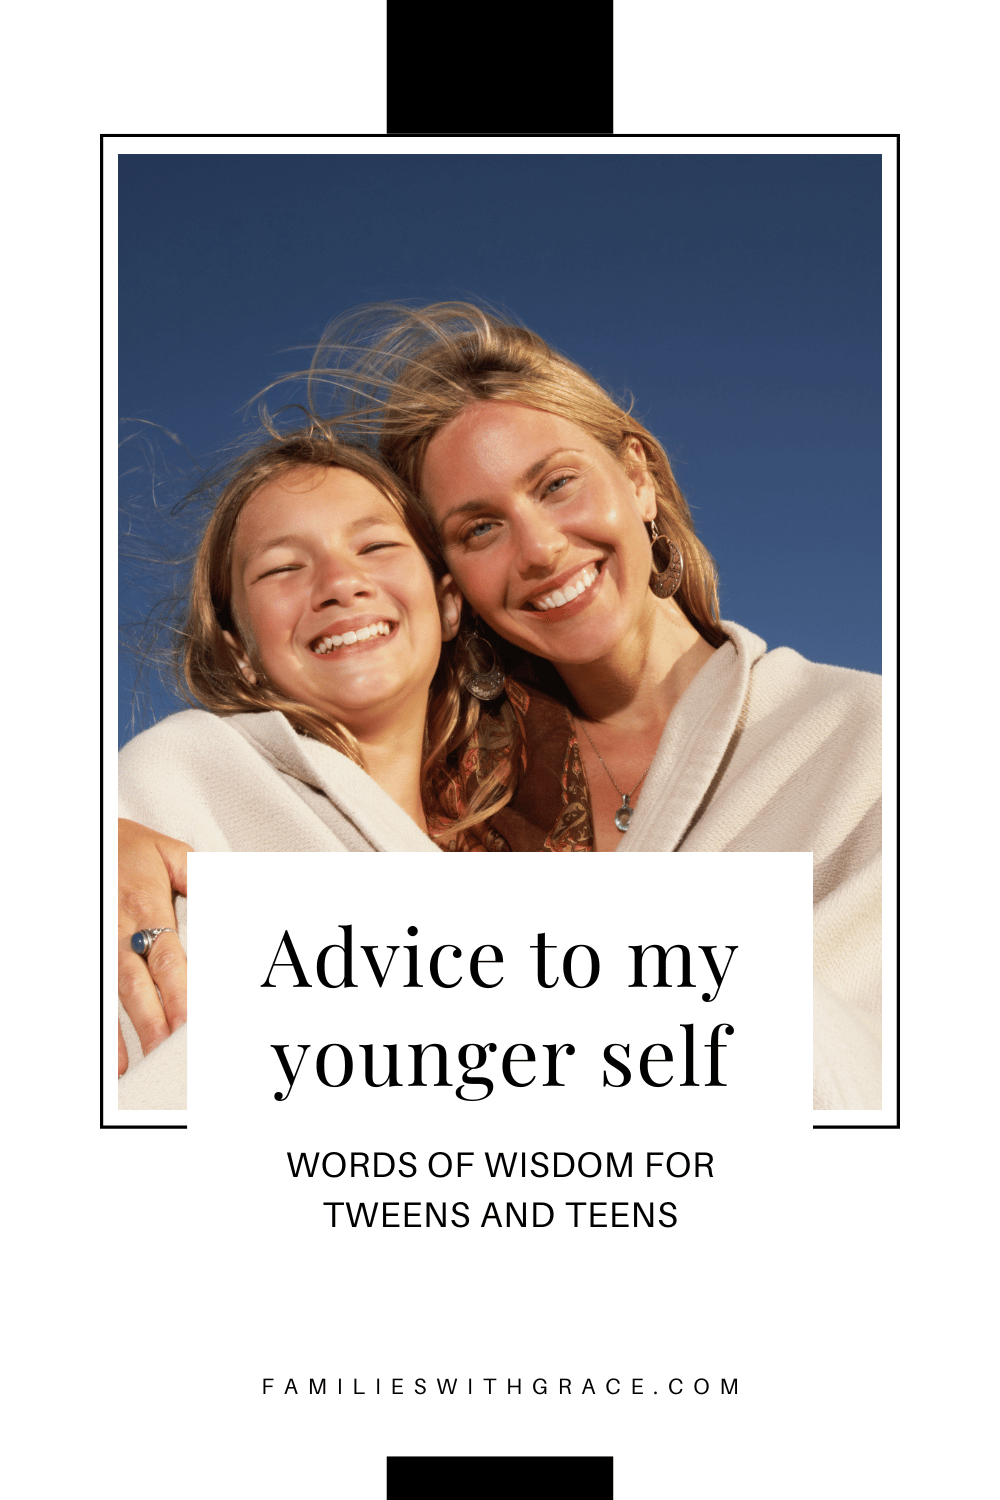 Advice to my younger self